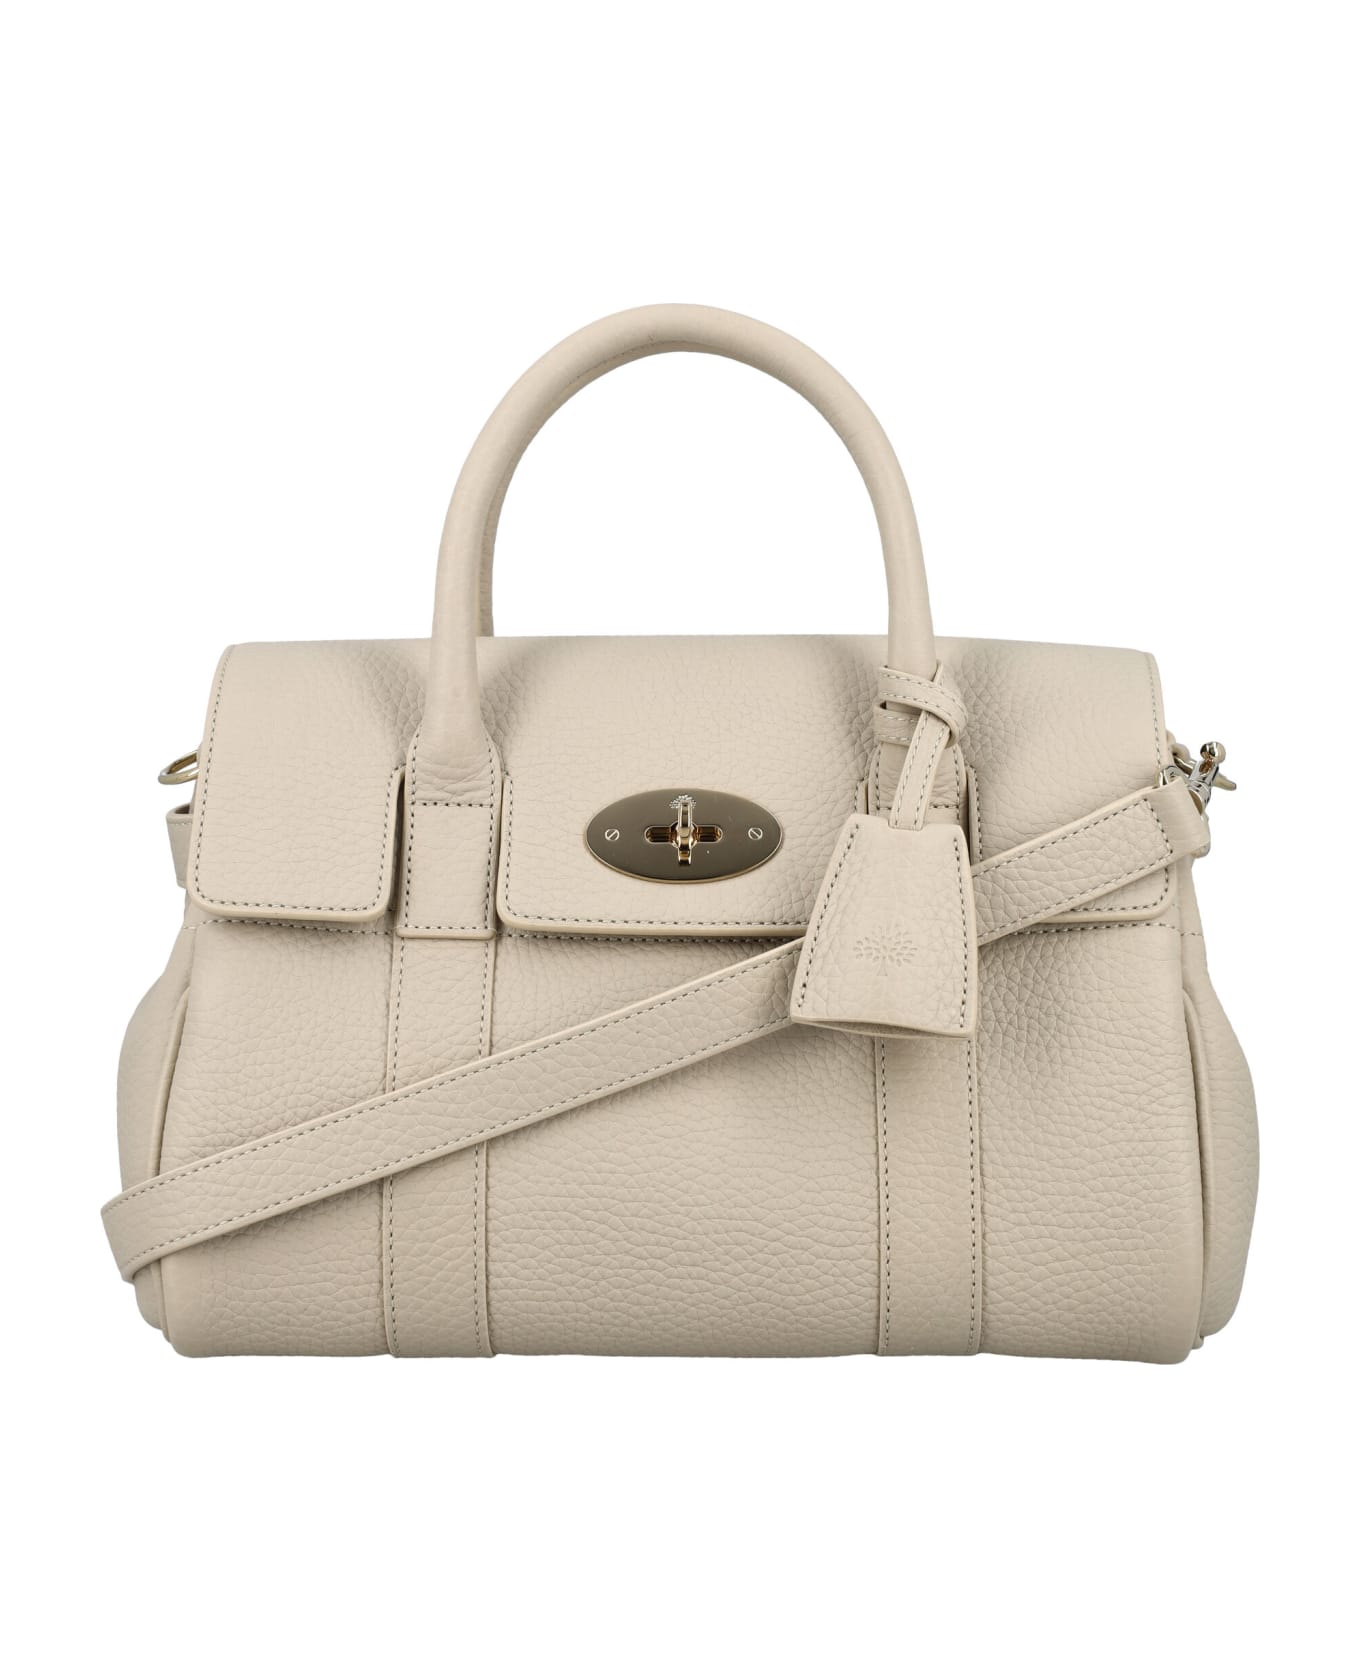 Mulberry Small Bayswater Satchel Hg - CHALK